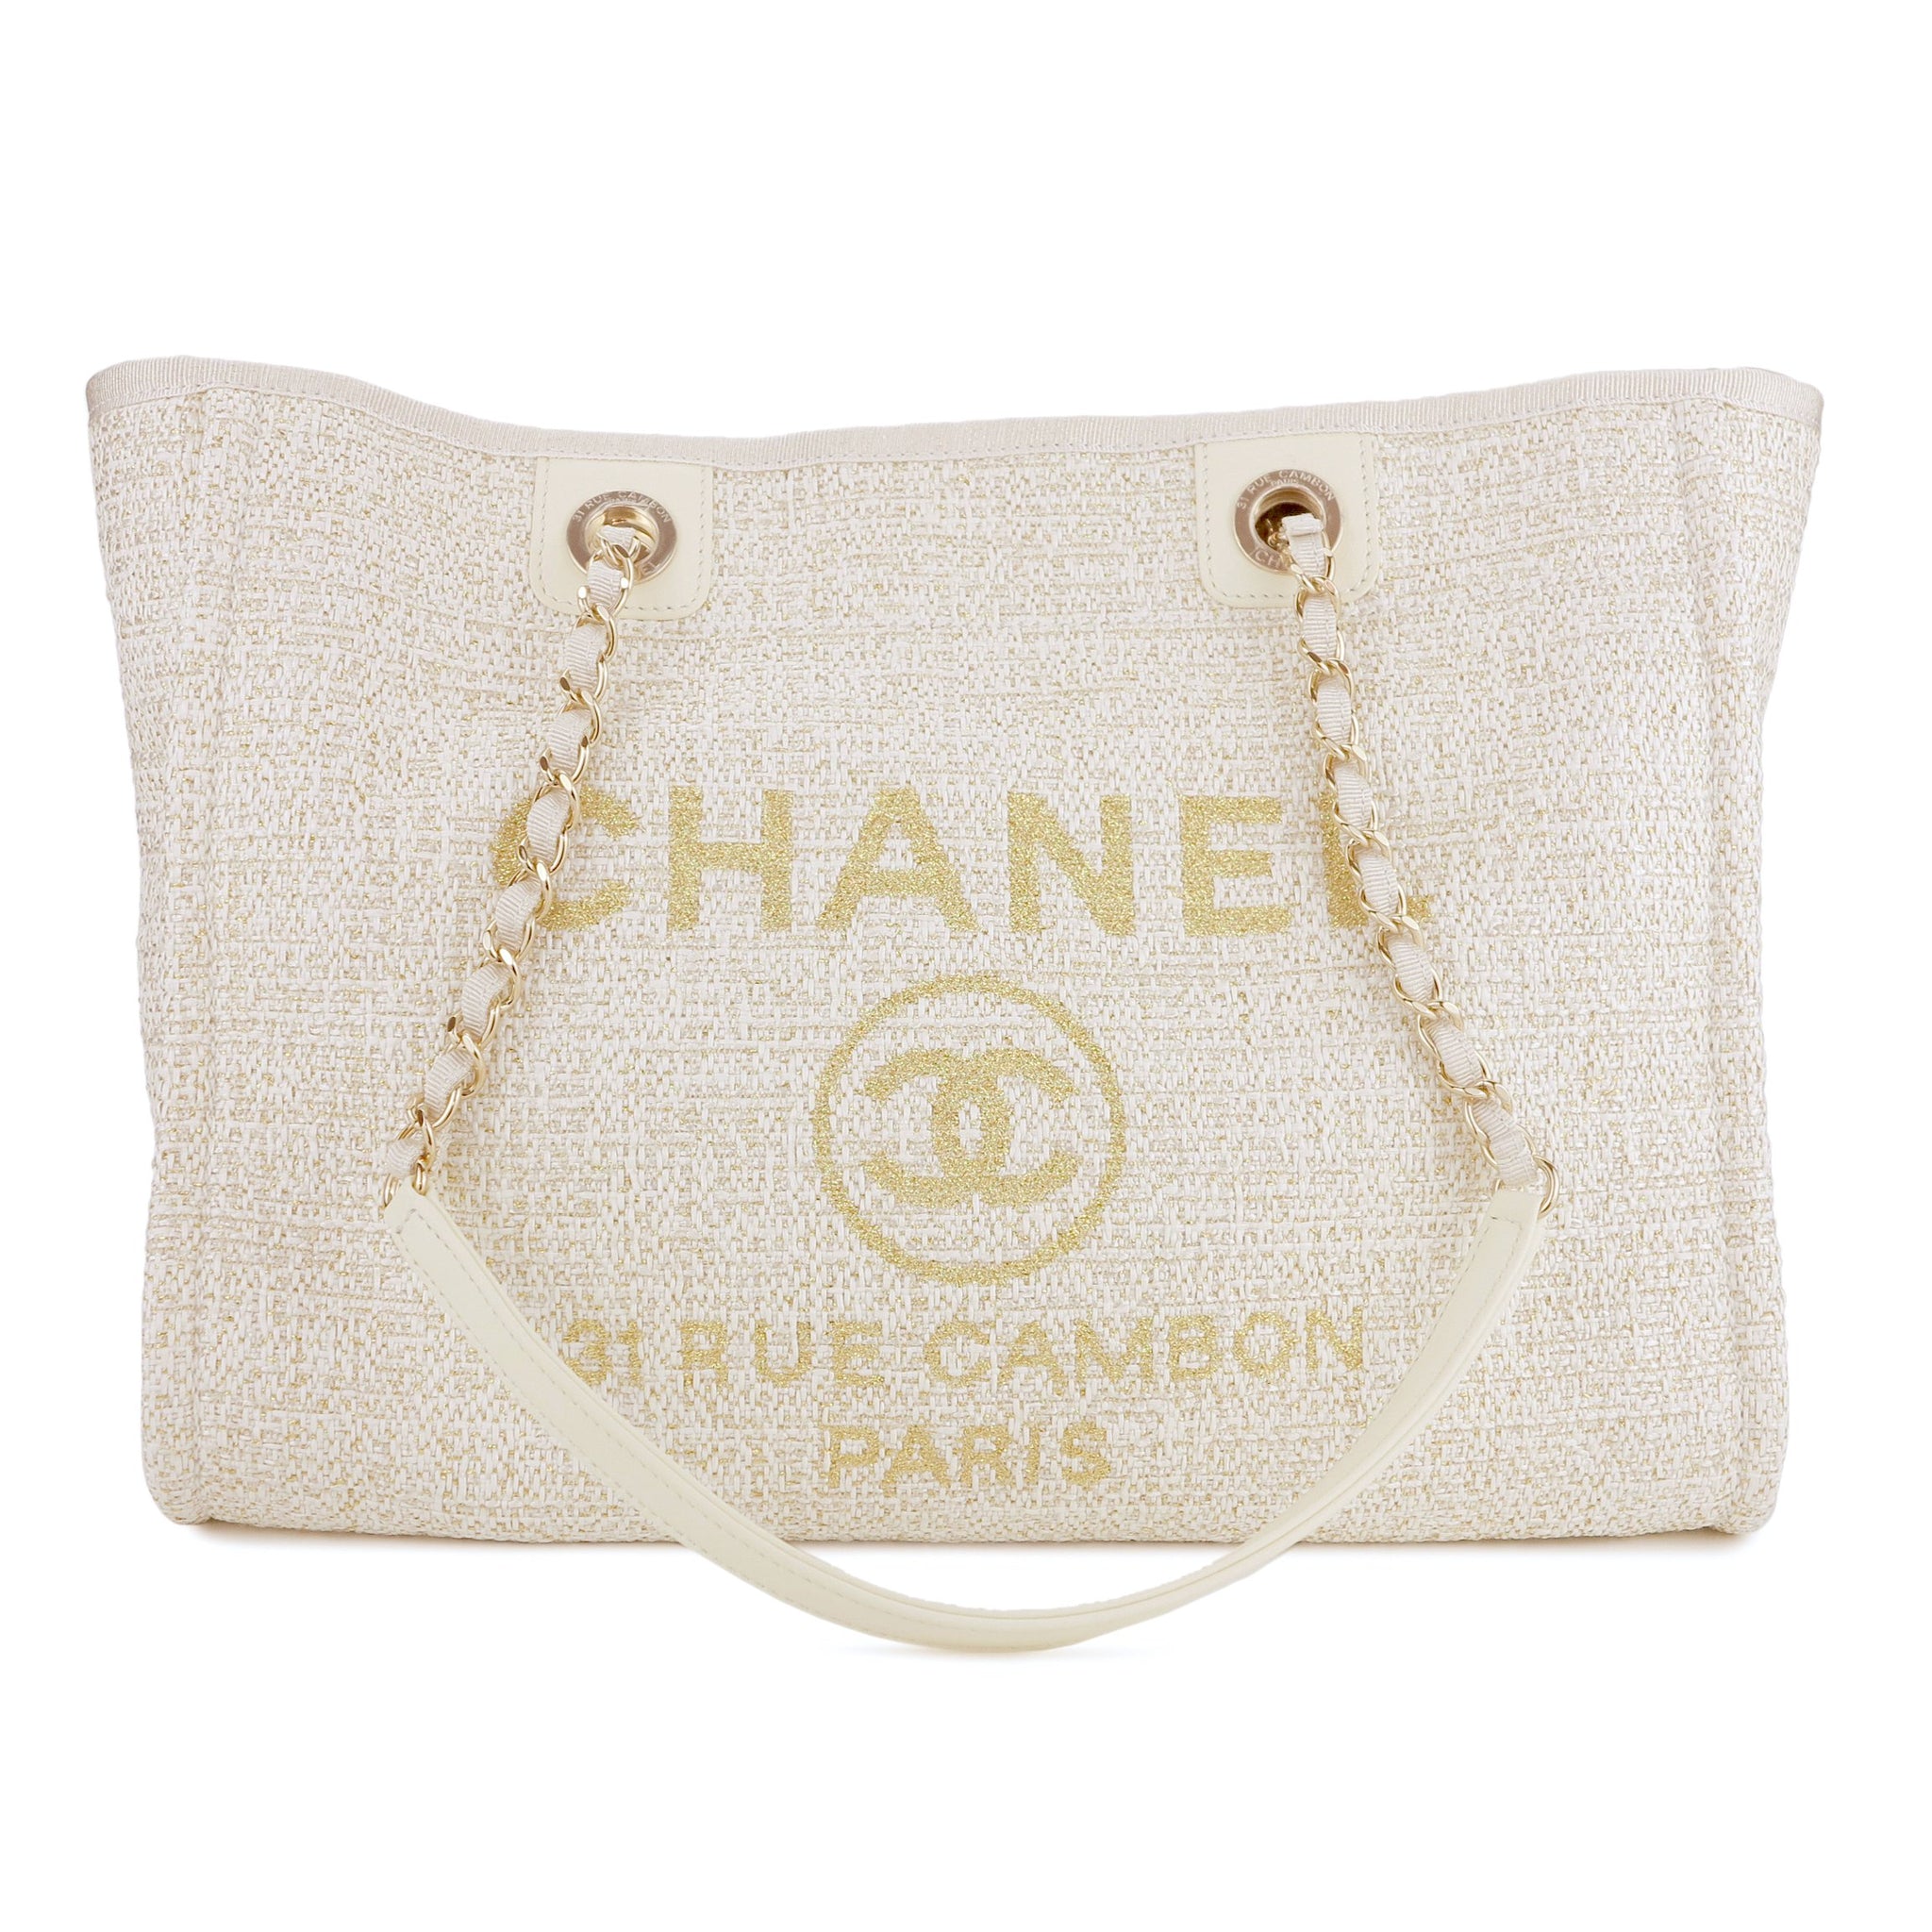 My Thoughts On The Chanel Deauville Tote Bag  Fashion For Lunch